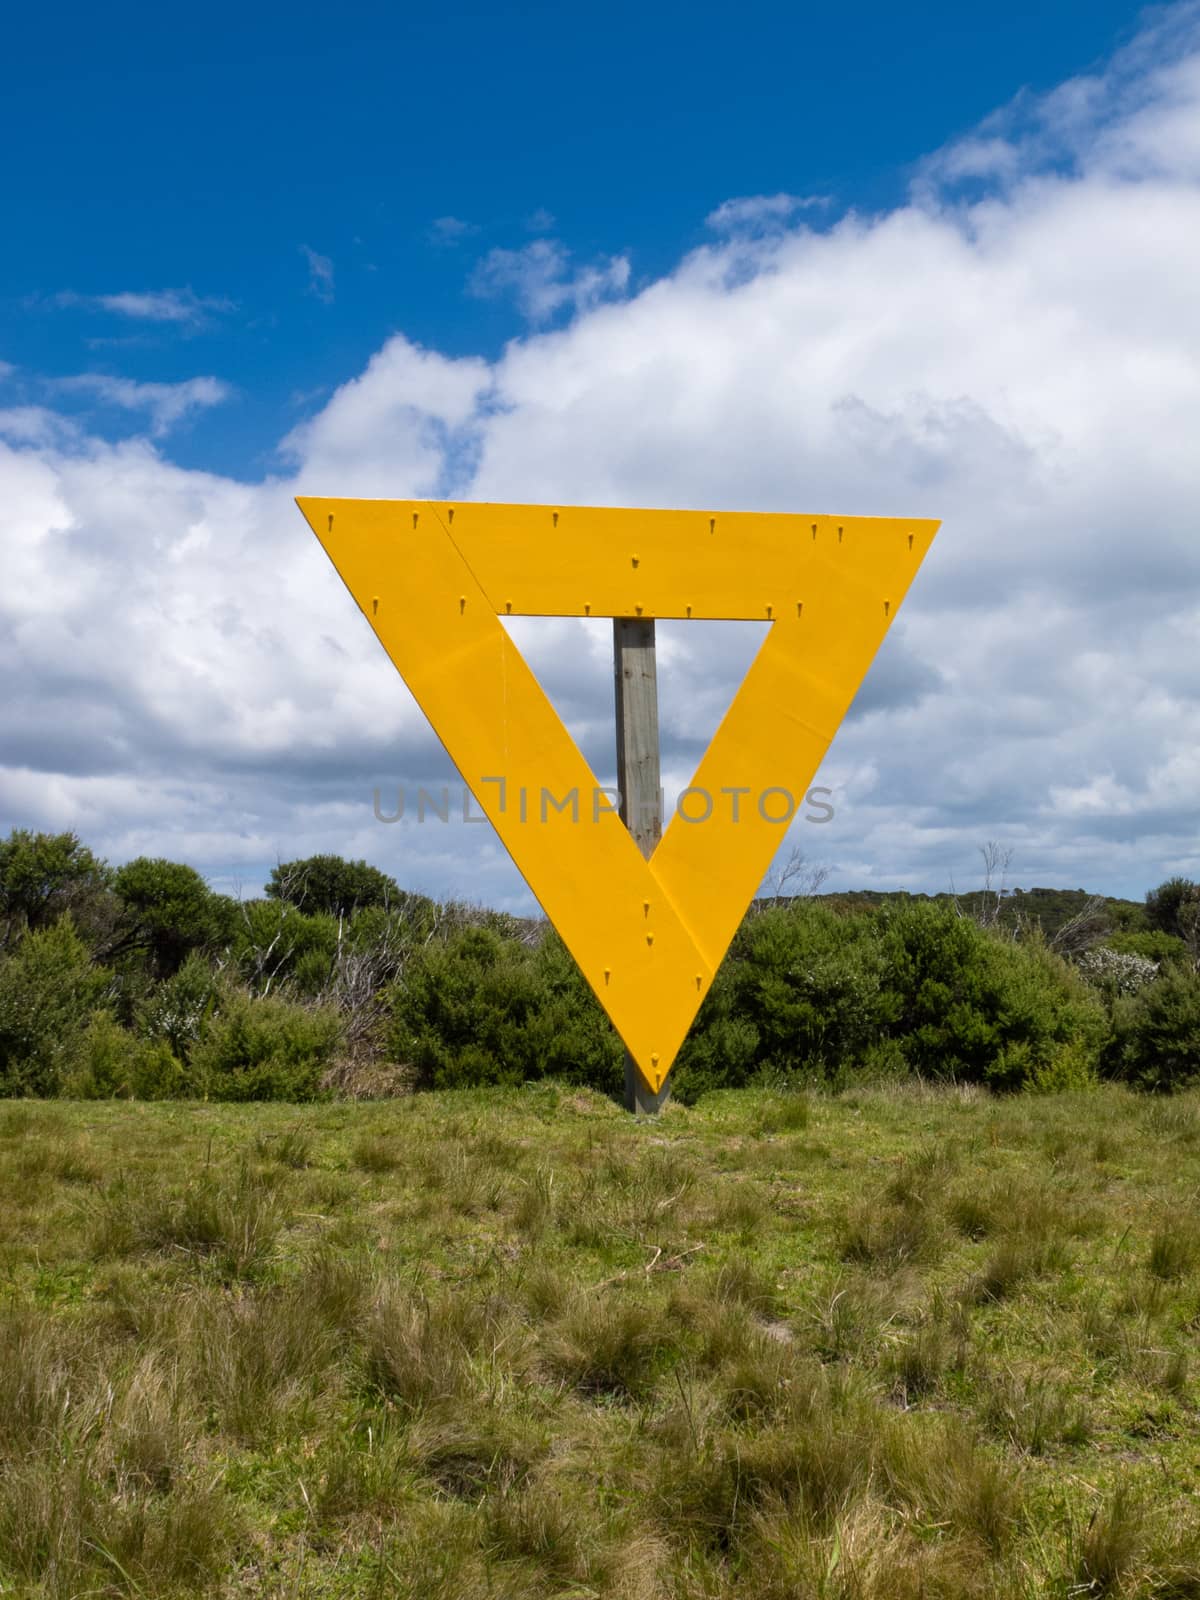 Shipping navigation yellow triangle sign on land by PiLens